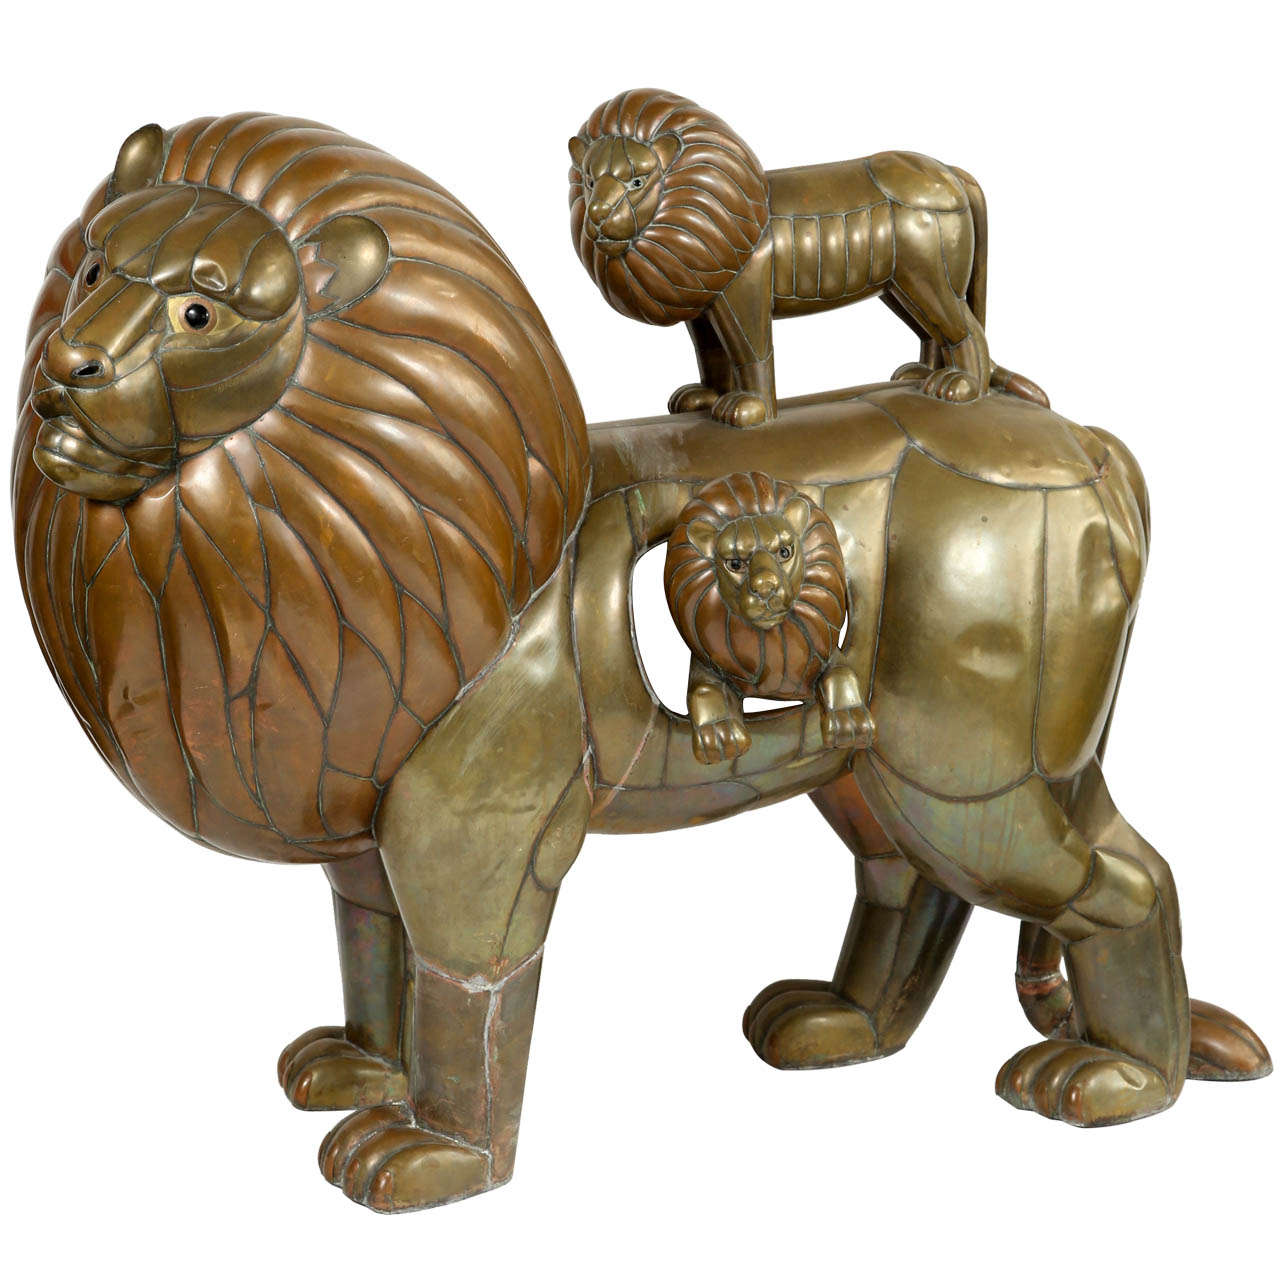 Sergio Bustamante "Group of Lions" Sculpture